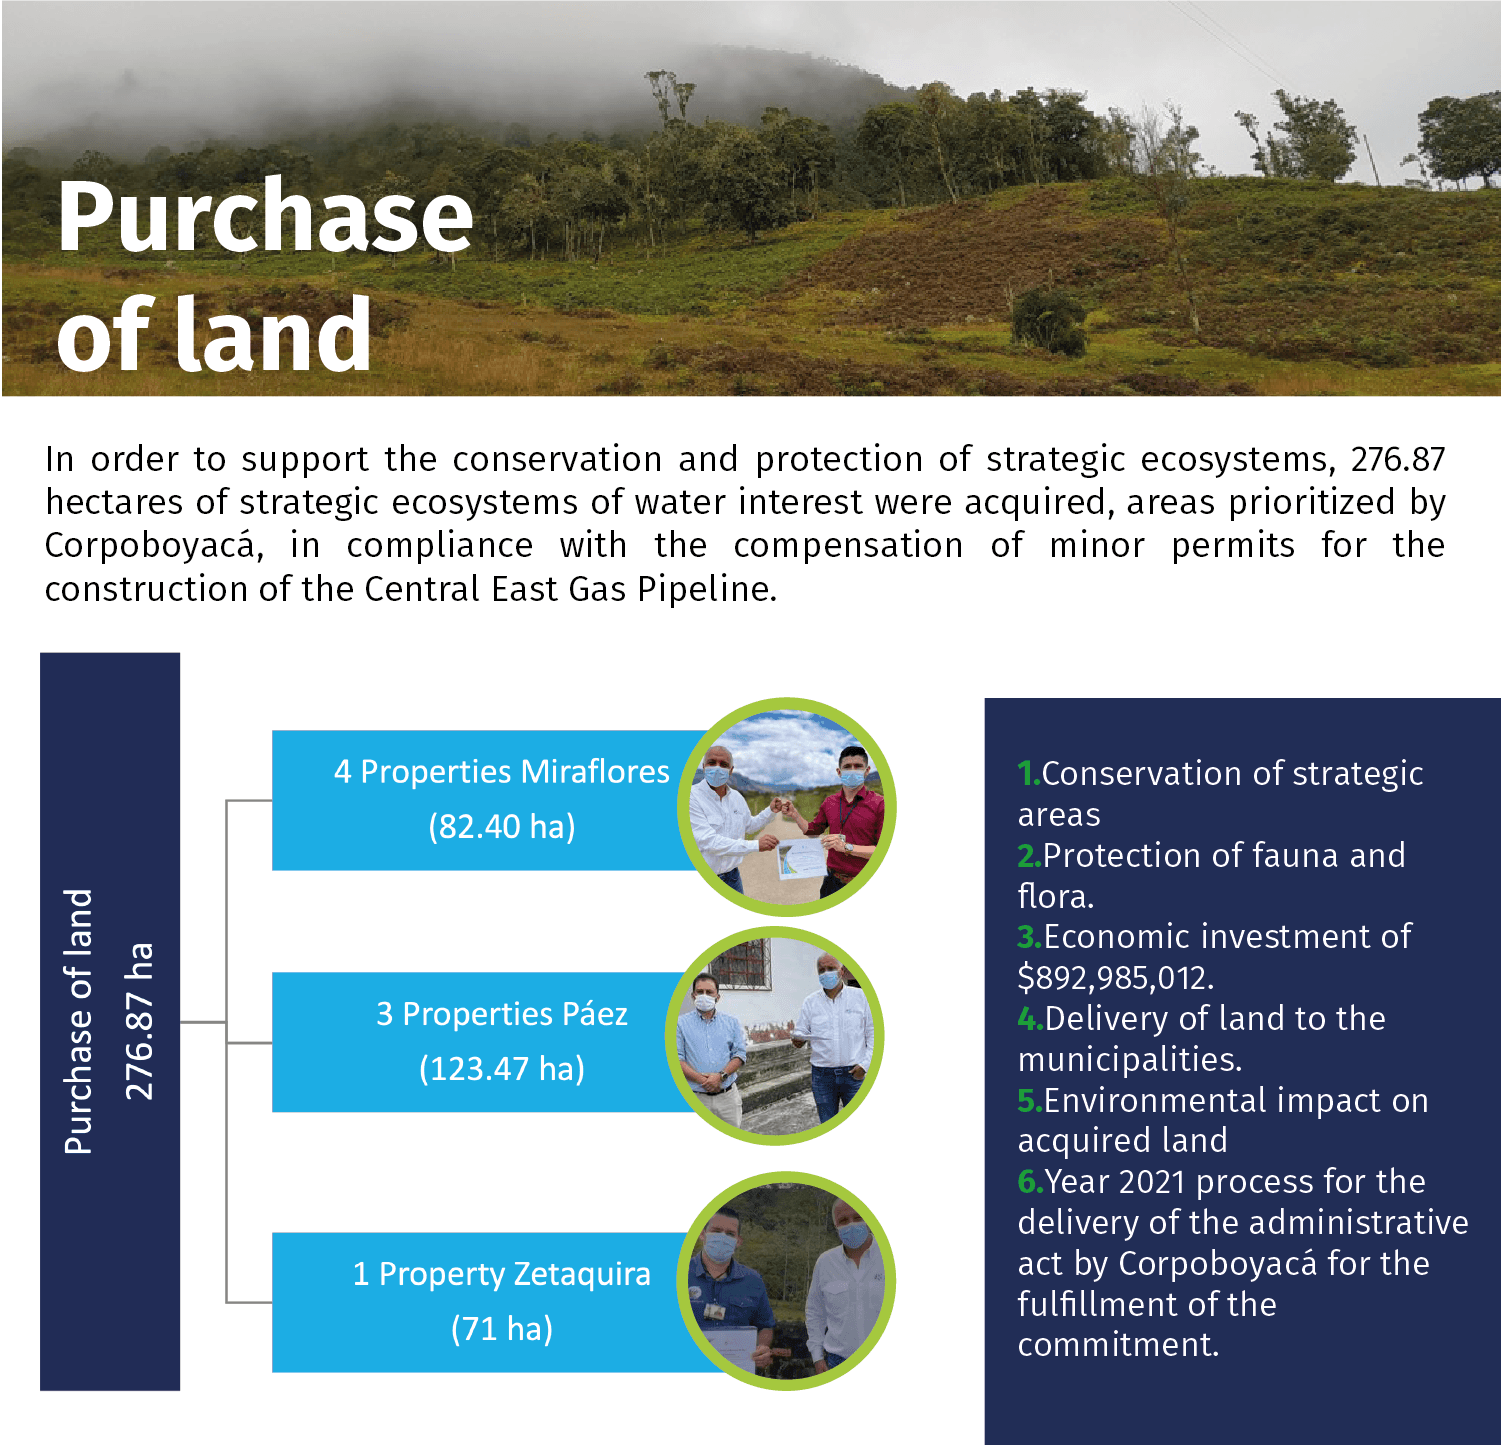 Purchase of land@2x-8.png